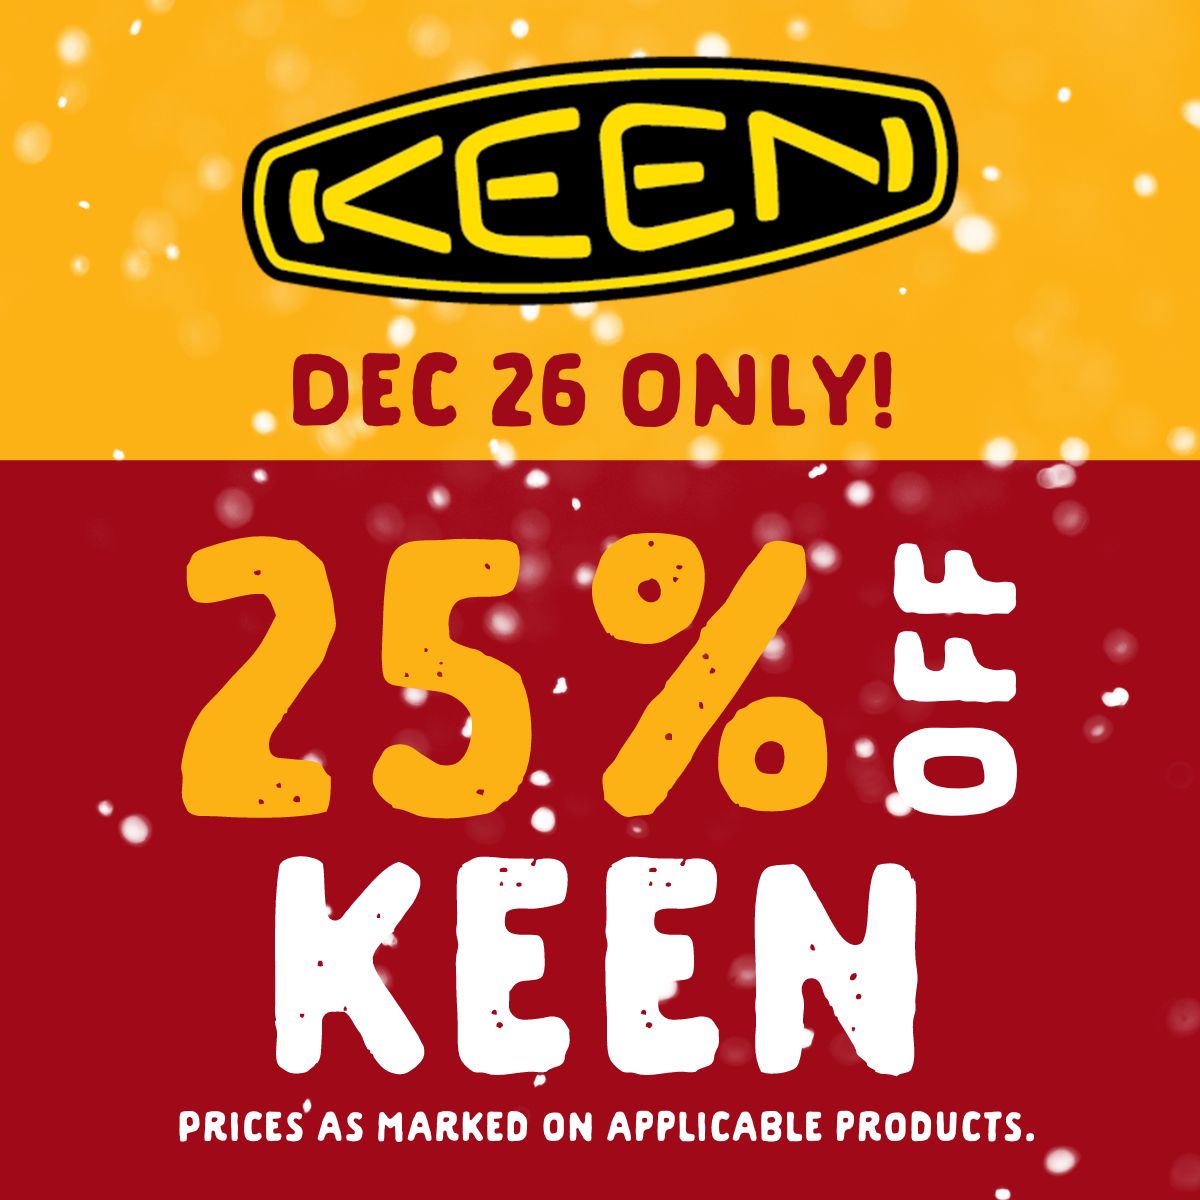 25% off Keen December 26 only! Prices as marked on applicable products.